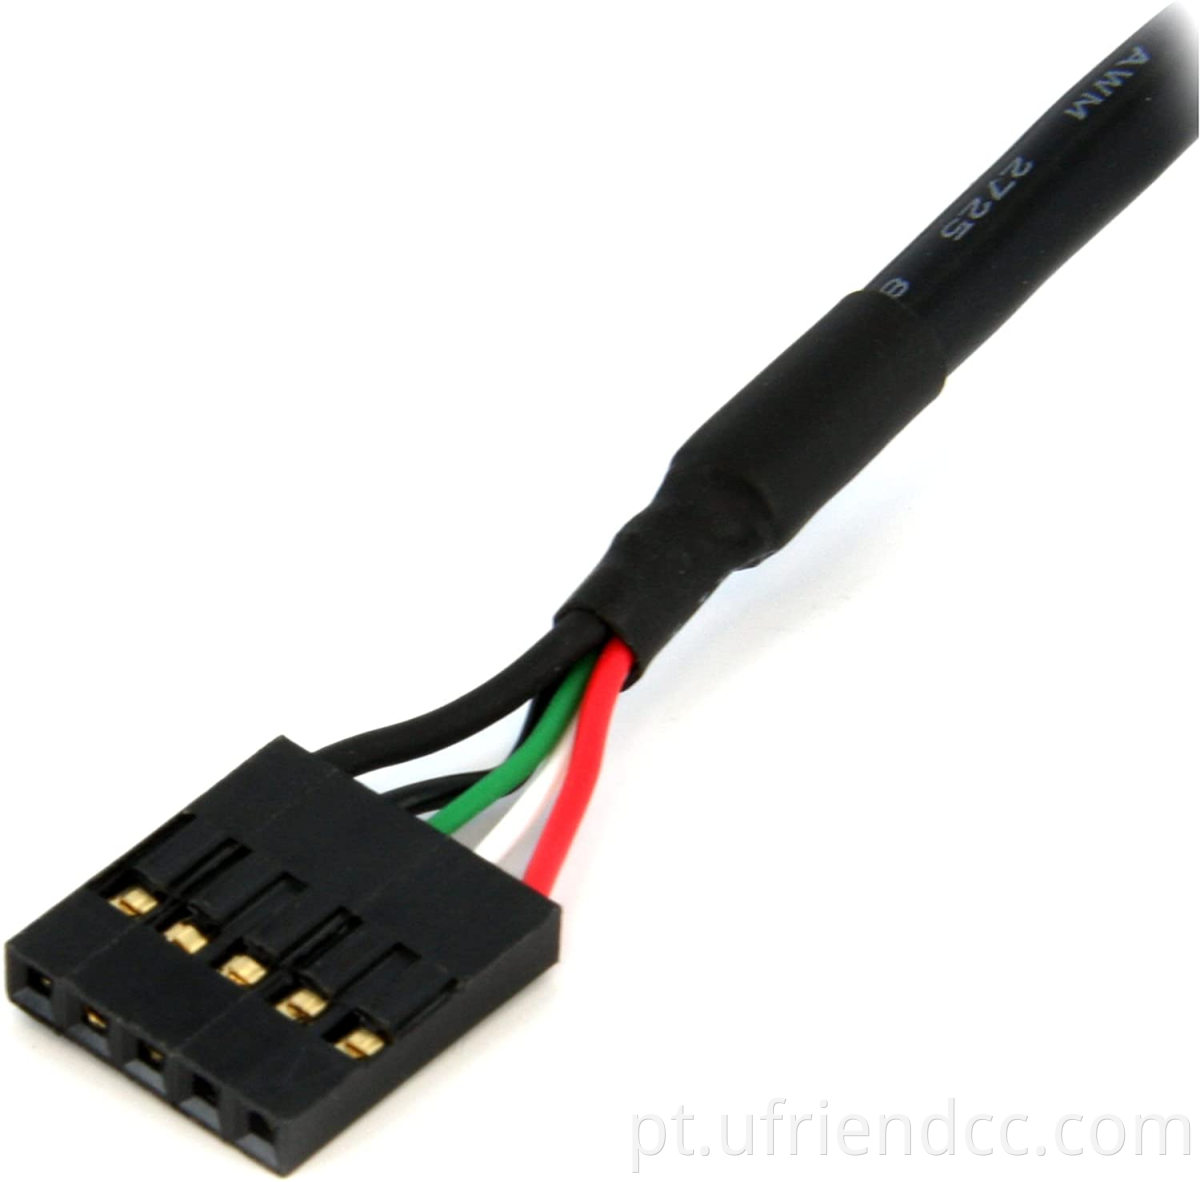 Interno 5 pinos USB IDC MotherBoard Cable F/F